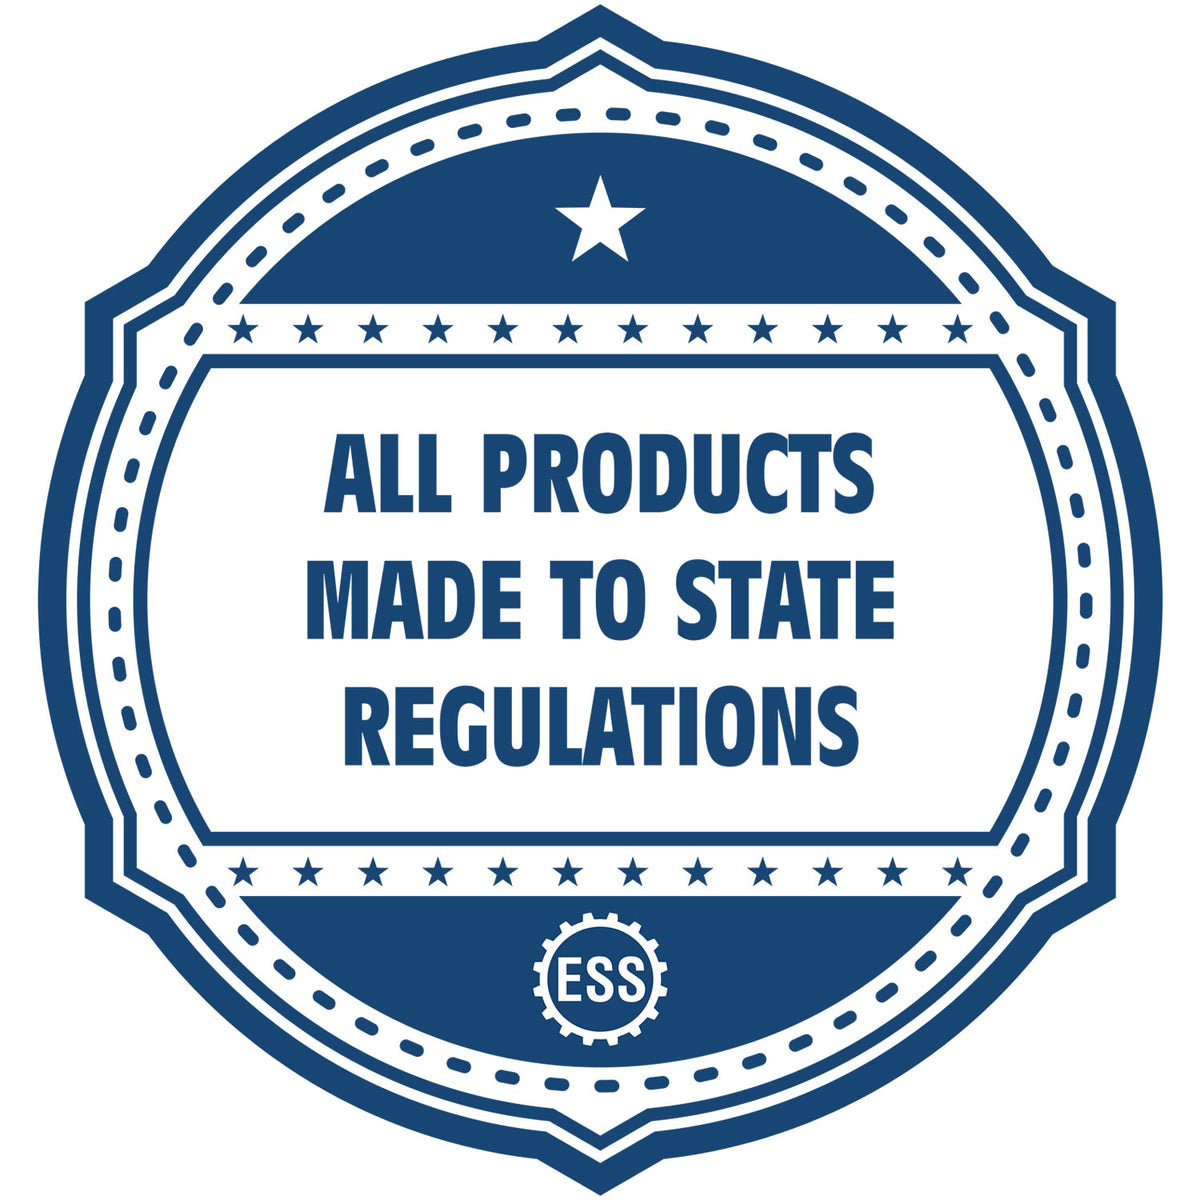 An icon or badge element for the Premium MaxLight Pre-Inked Michigan Engineering Stamp showing that this product is made in compliance with state regulations.